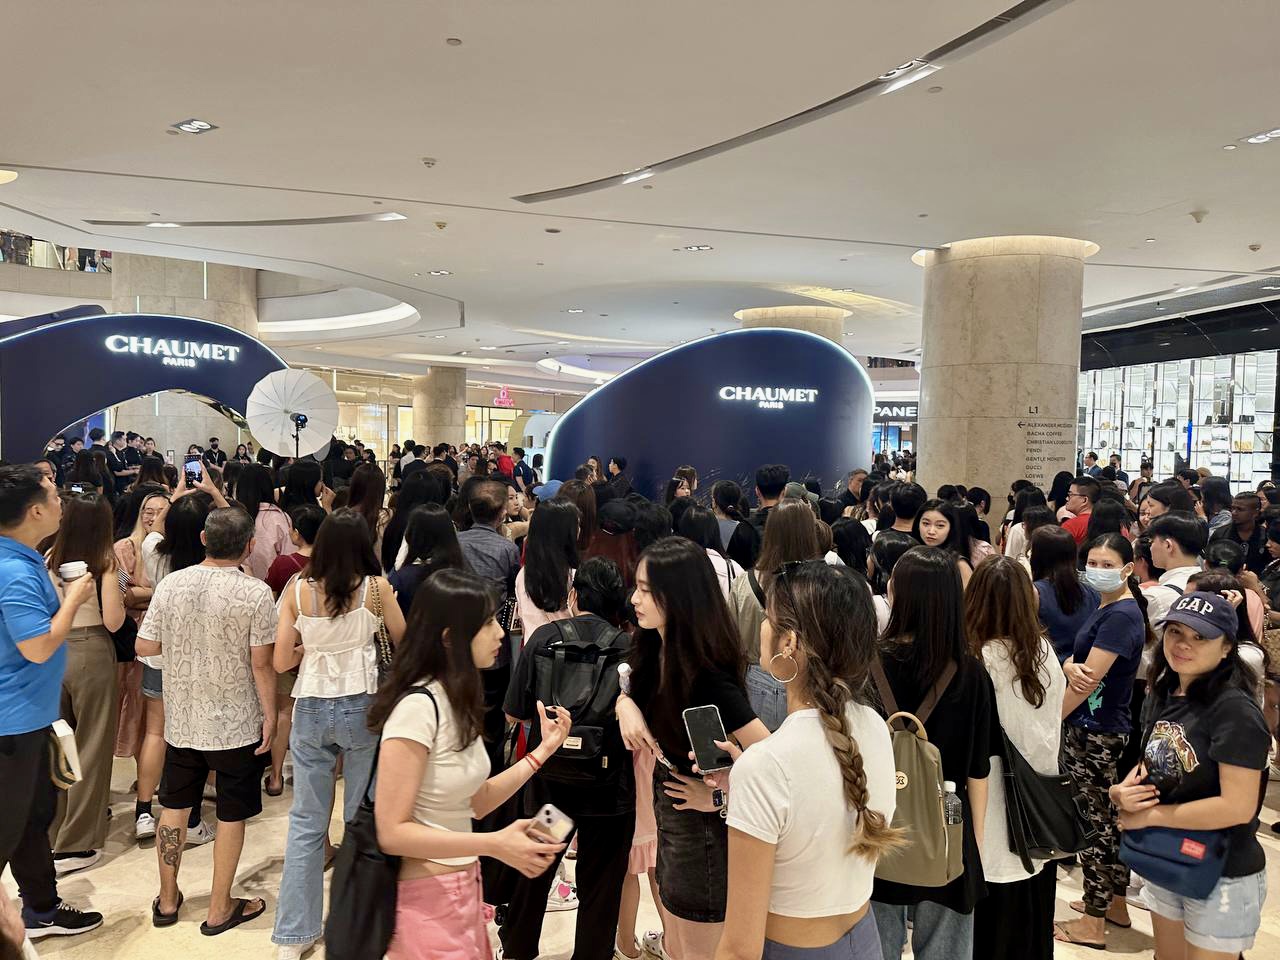 We Waited For 2 Hours Just To See Him For 3 Secs”: Singaporeans Flock To  Ion Orchard To See Cha Eun Woo - 8days